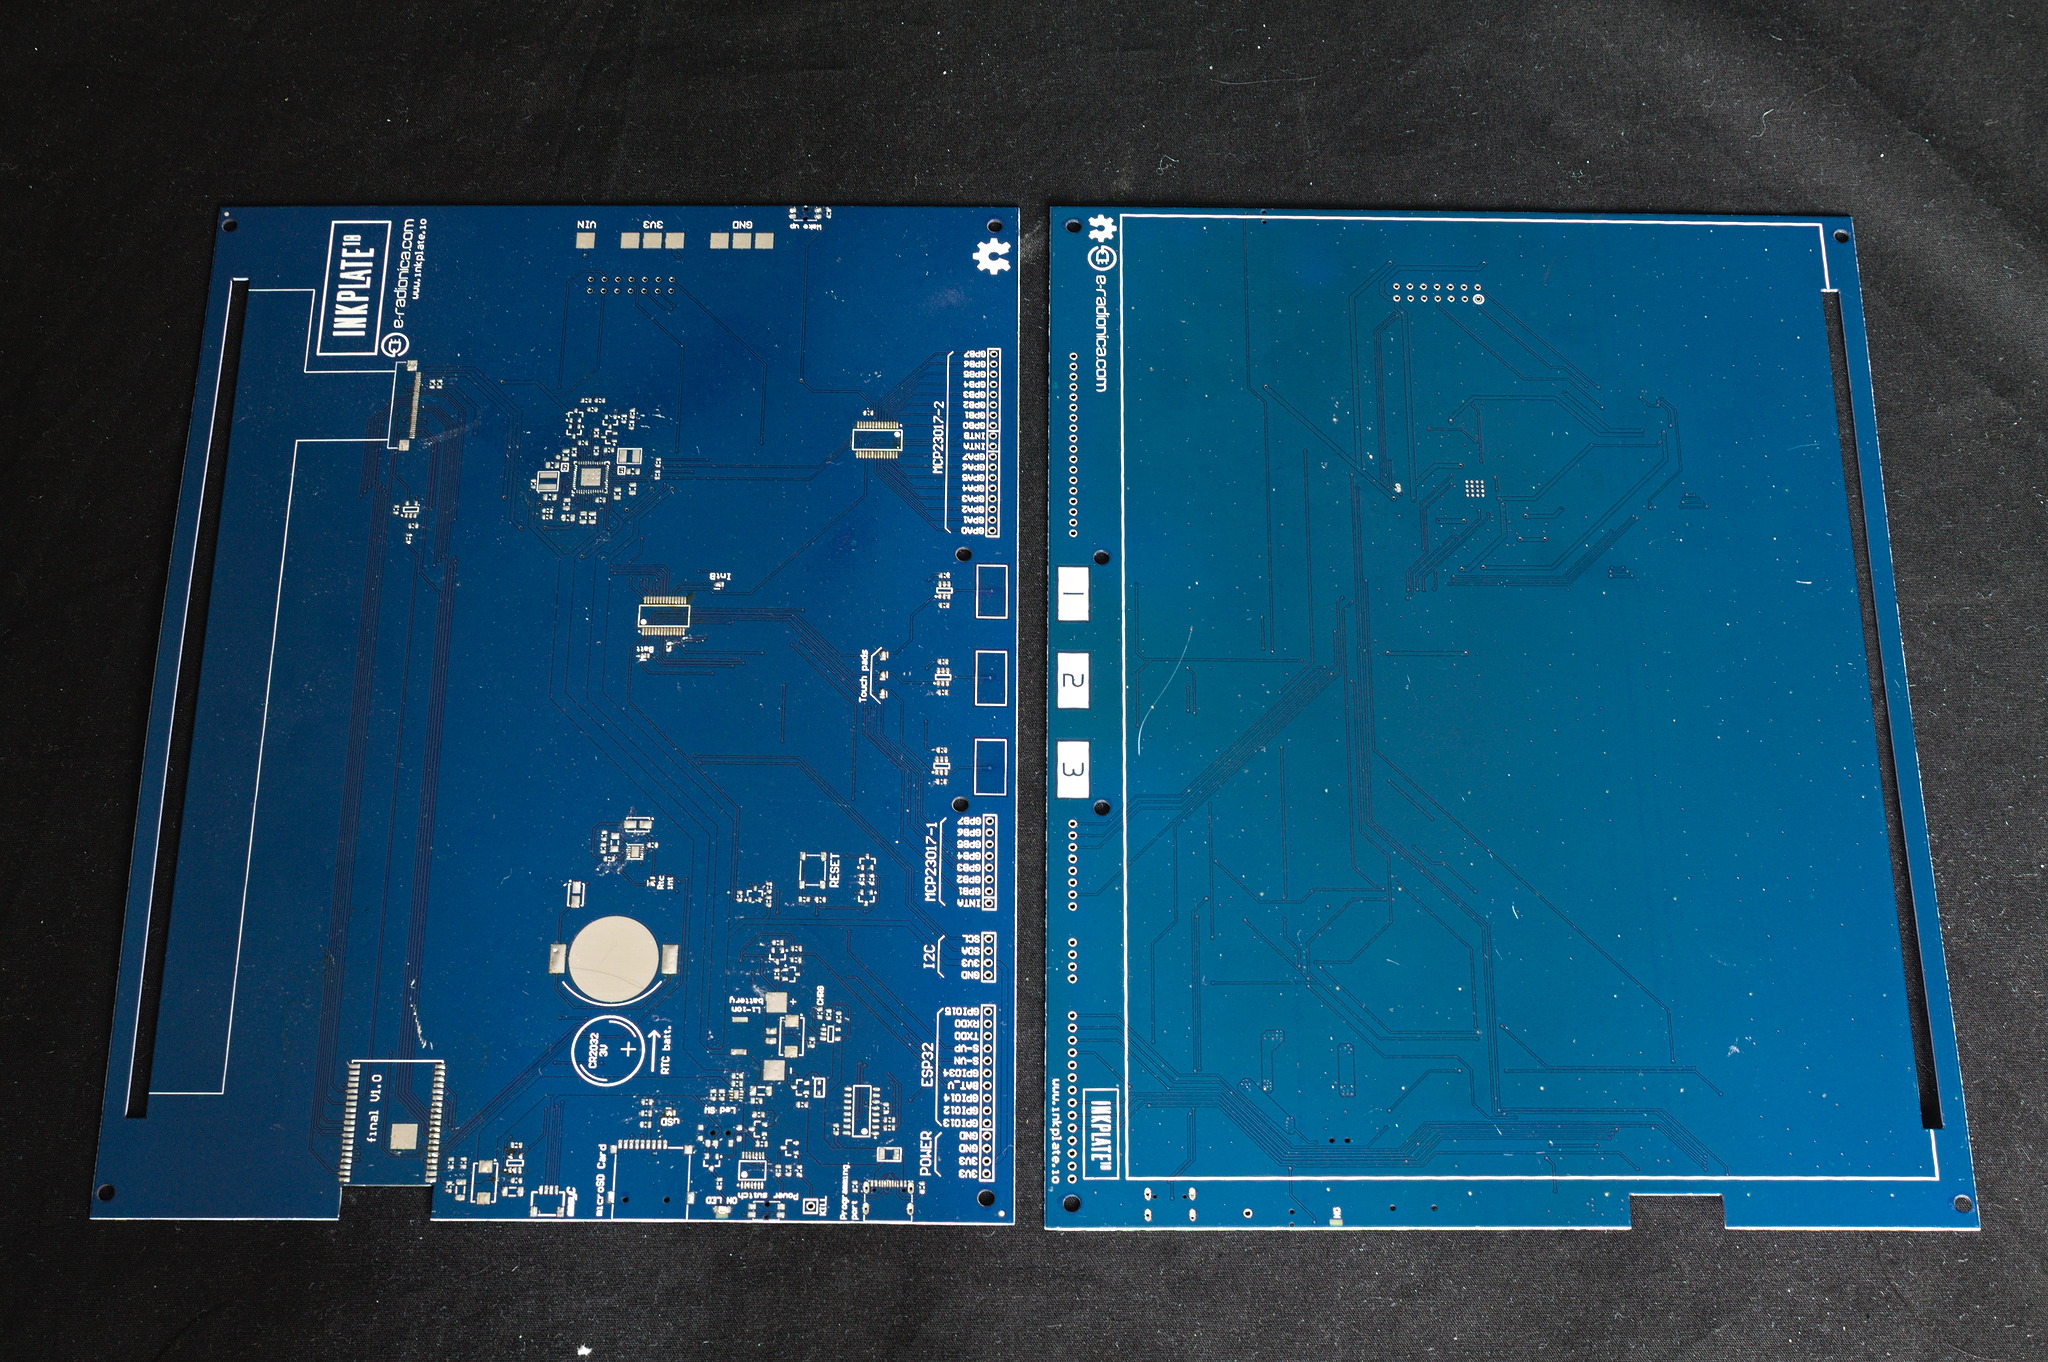 Two PCBs for the Inkplate 10 from eradionica, unpopulated.
They are rectangles with a long slit close to one long side, a
few holes and a notch at the bottom.